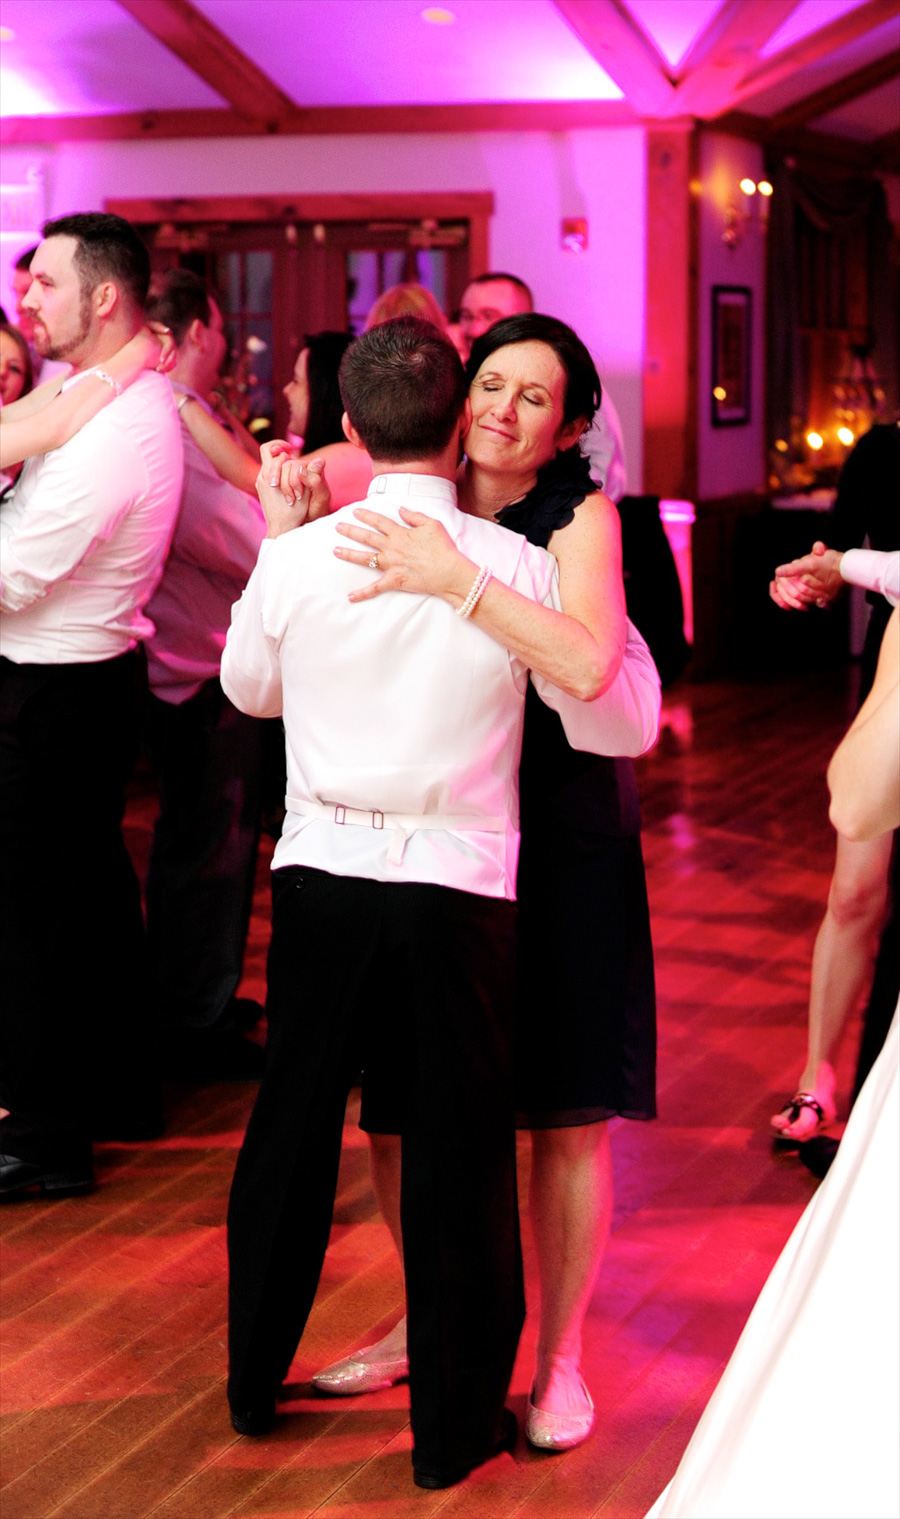 John dancing with his new mother-in-law. :)